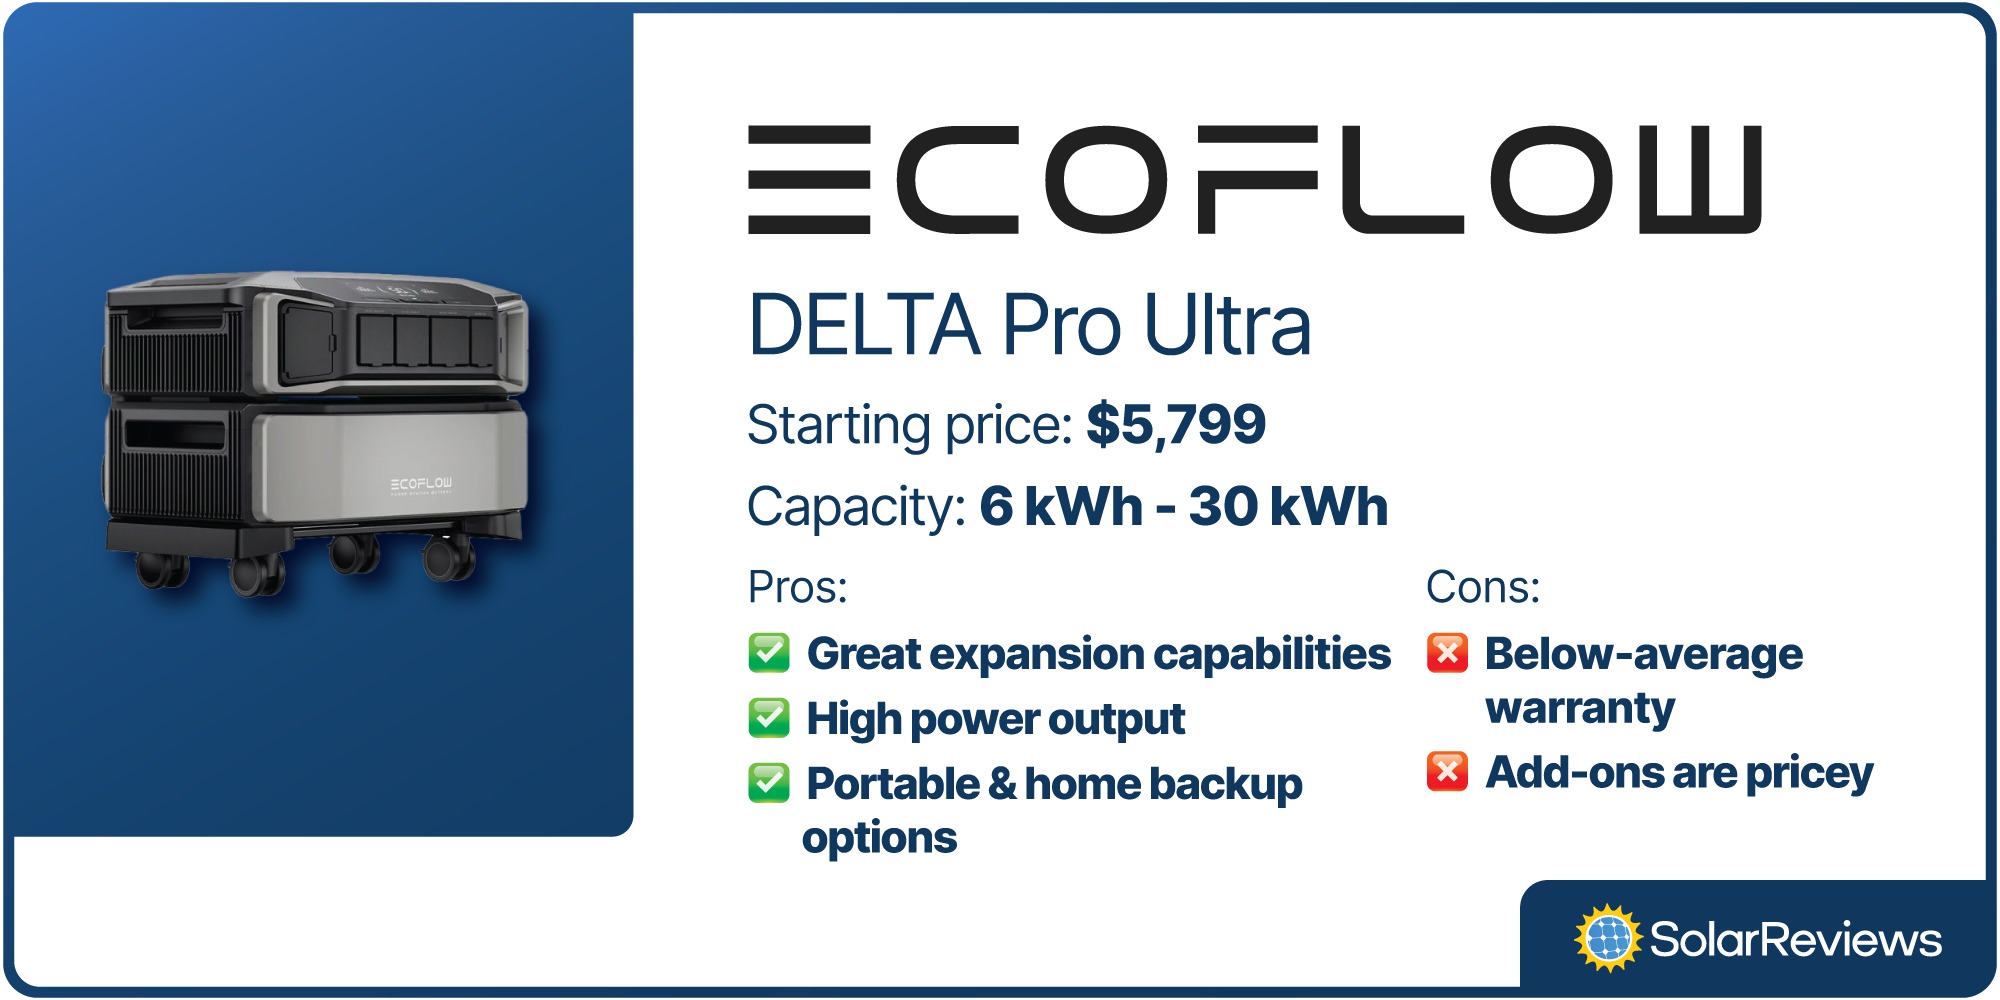 The EcoFlow DELTA Pro Ultra has a starting price of $5,799 and a capacity ranging from 6 kWh - 30 kWh.